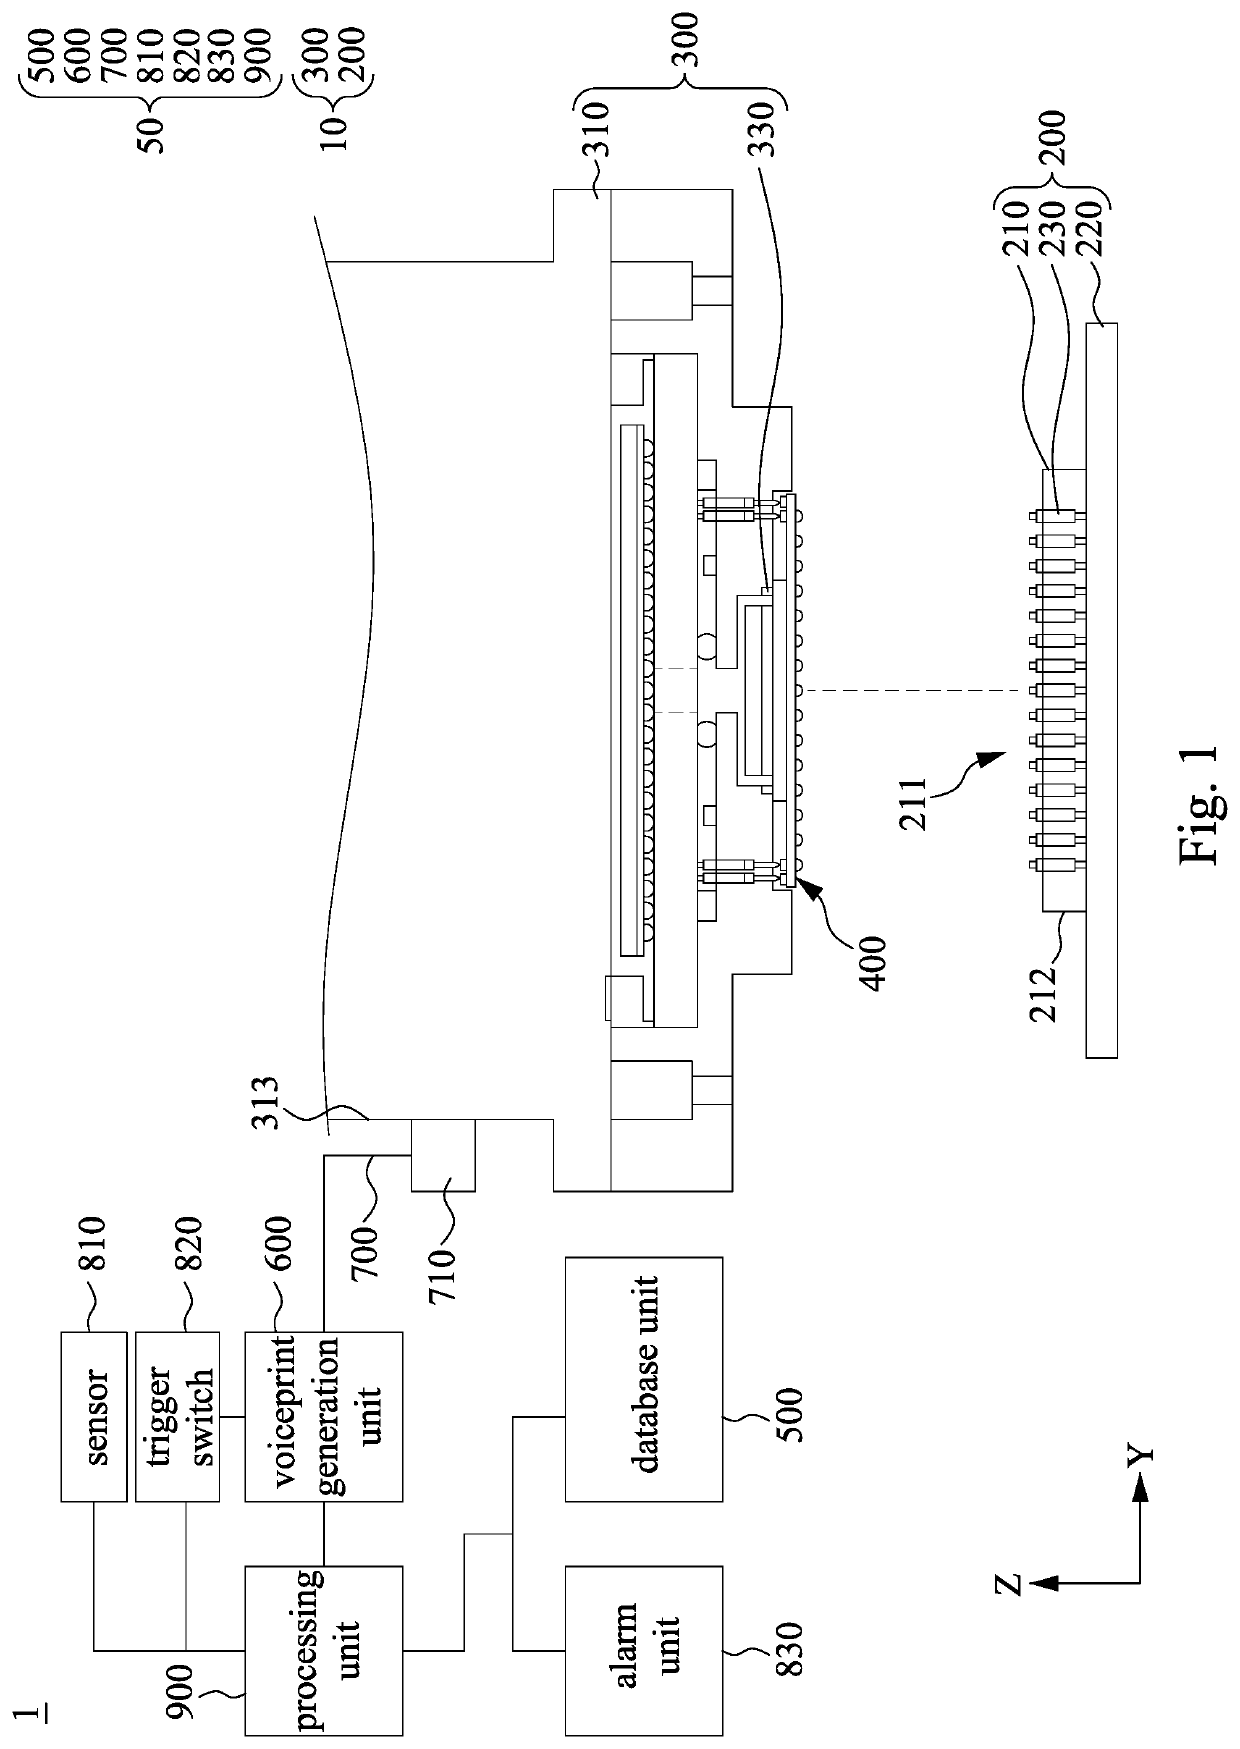 Testing system, crack noise monitoring device and method for monitoring crack noise